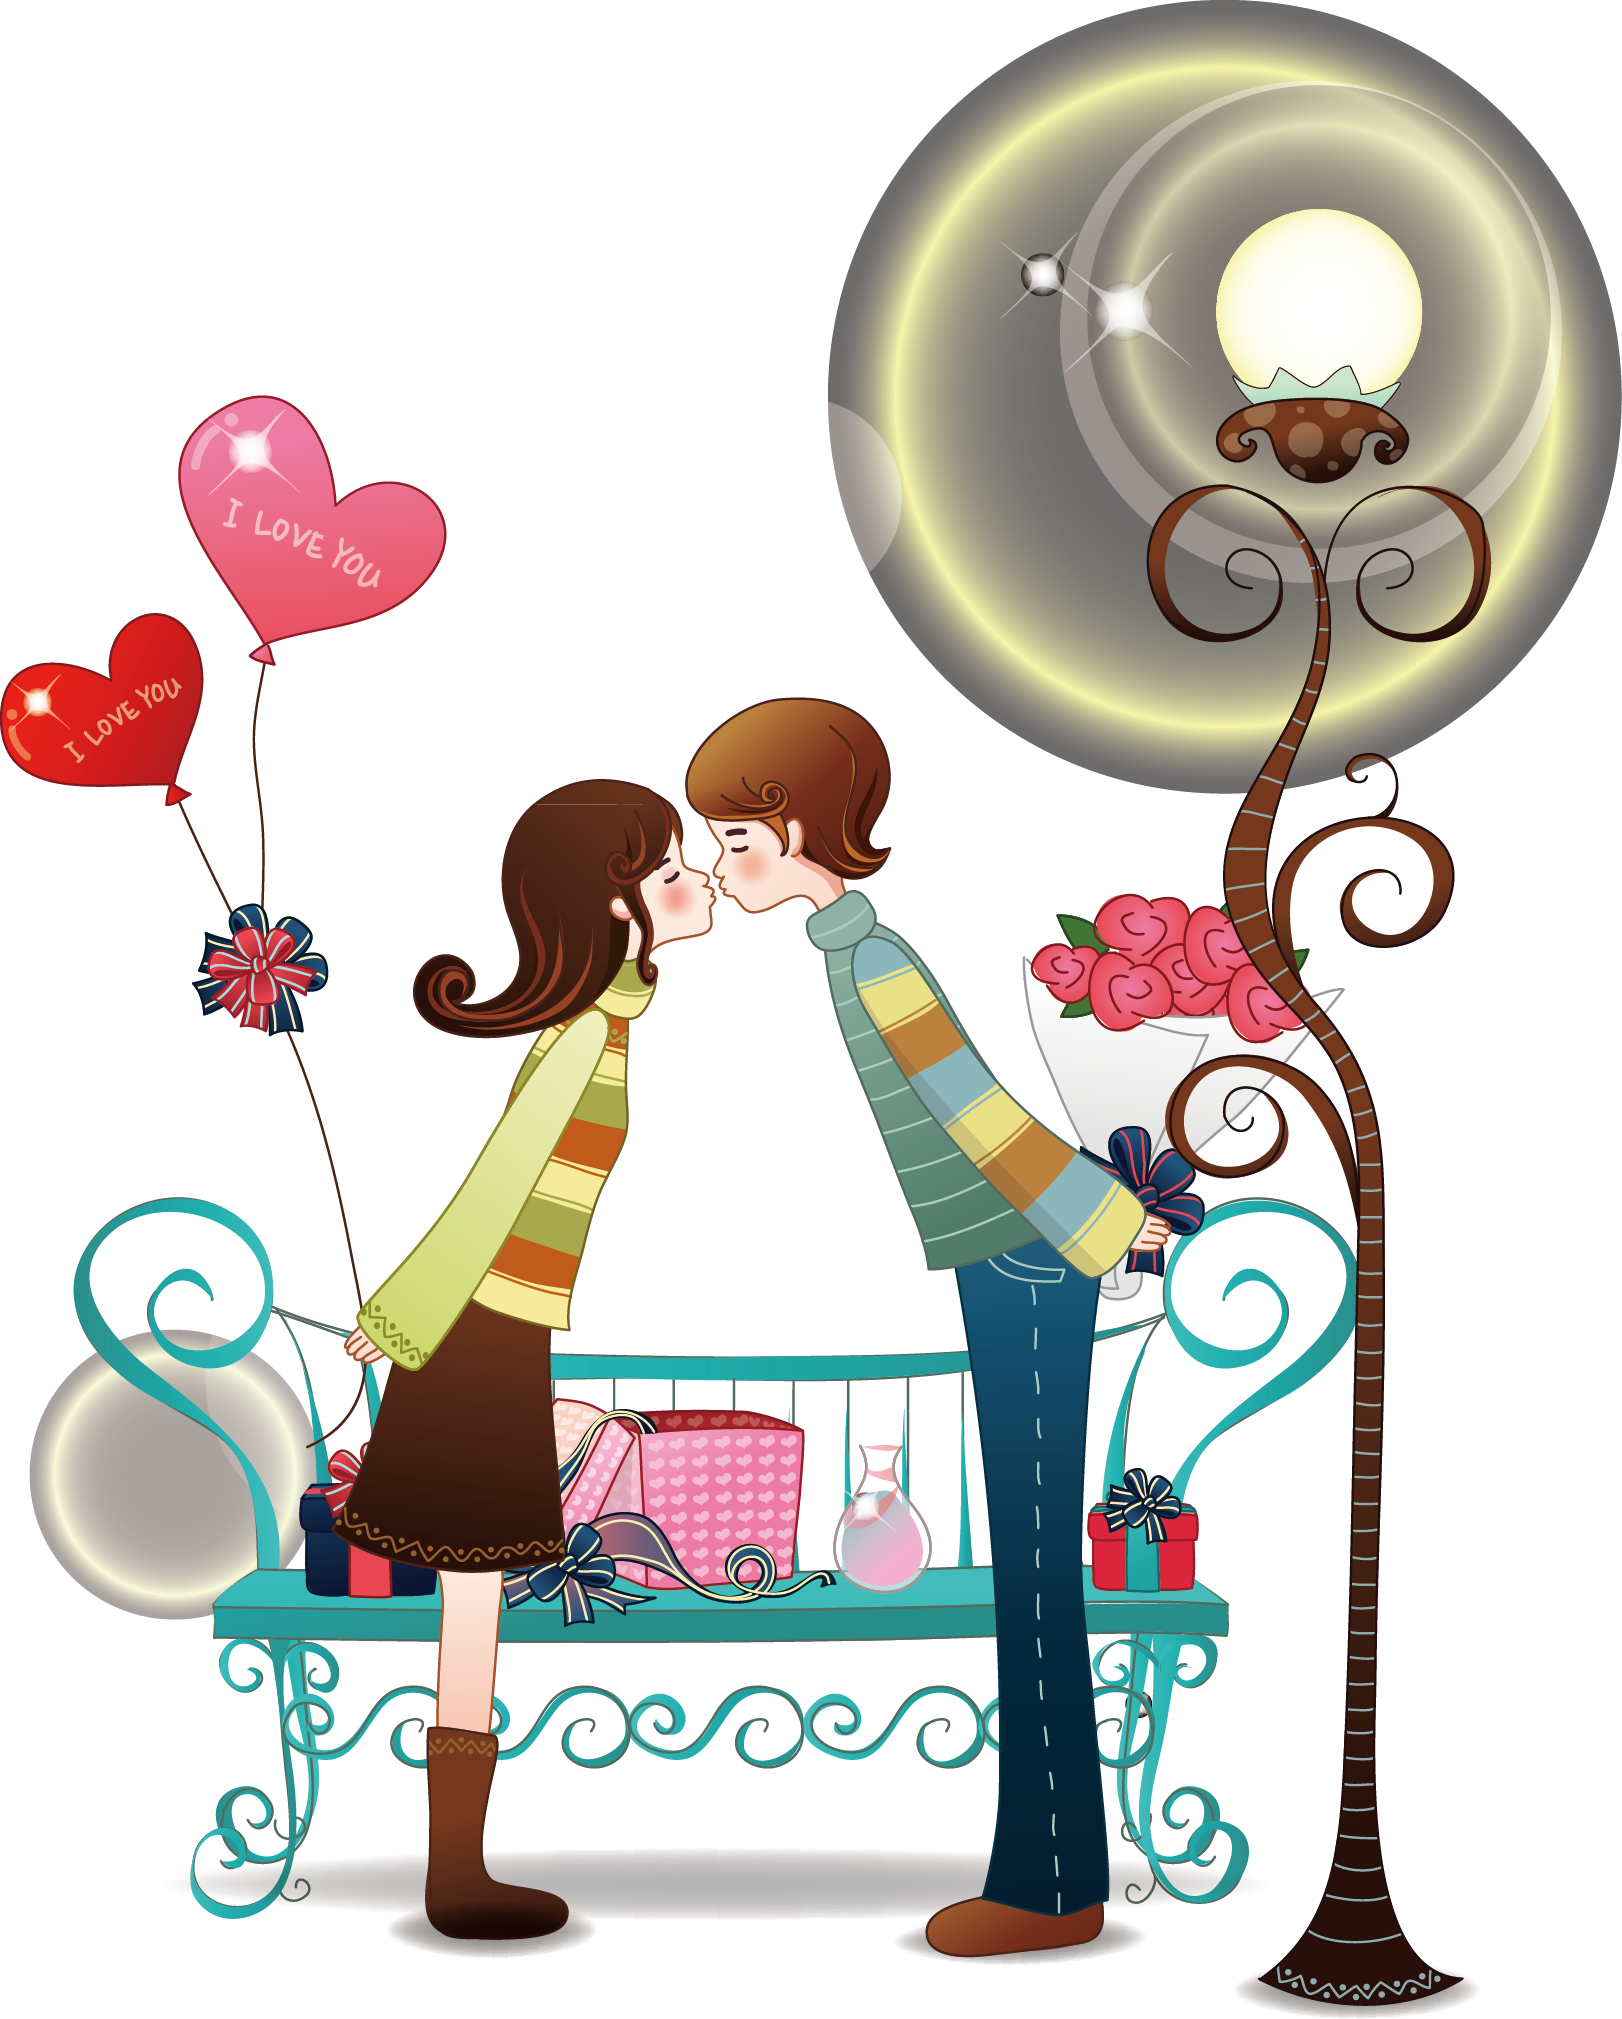 Couple Love Cartoon PNG Image High Quality Clipart